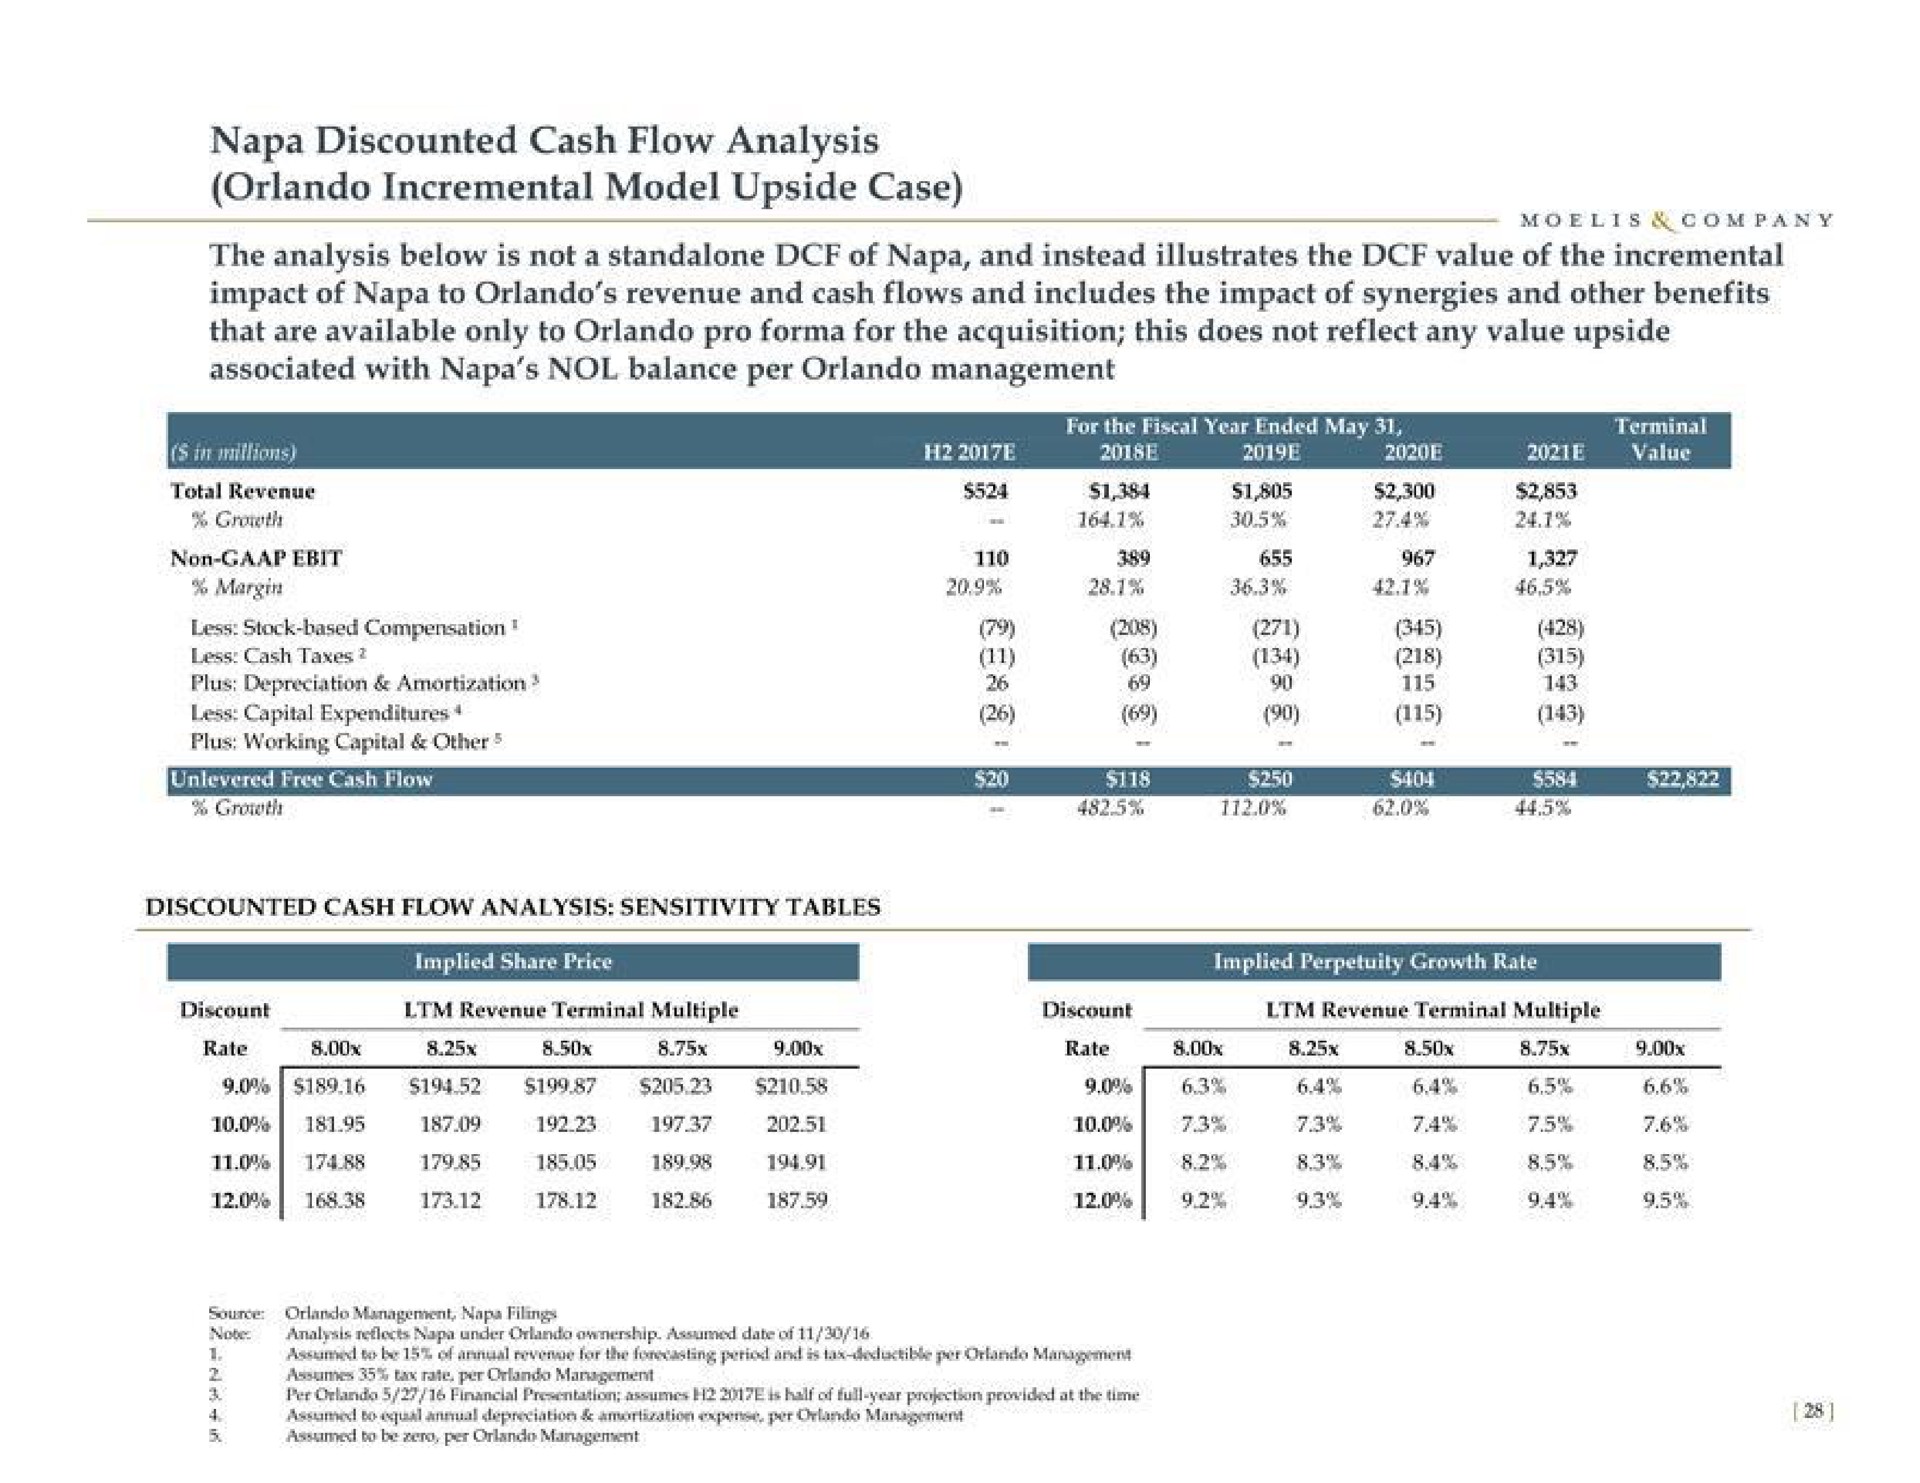 napa discounted cash flow analysis incremental model upside case the analysis below is not a of napa and instead illustrates the value of the incremental impact of napa to revenue and cash flows and includes the impact of synergies and other benefits pen the | Moelis & Company